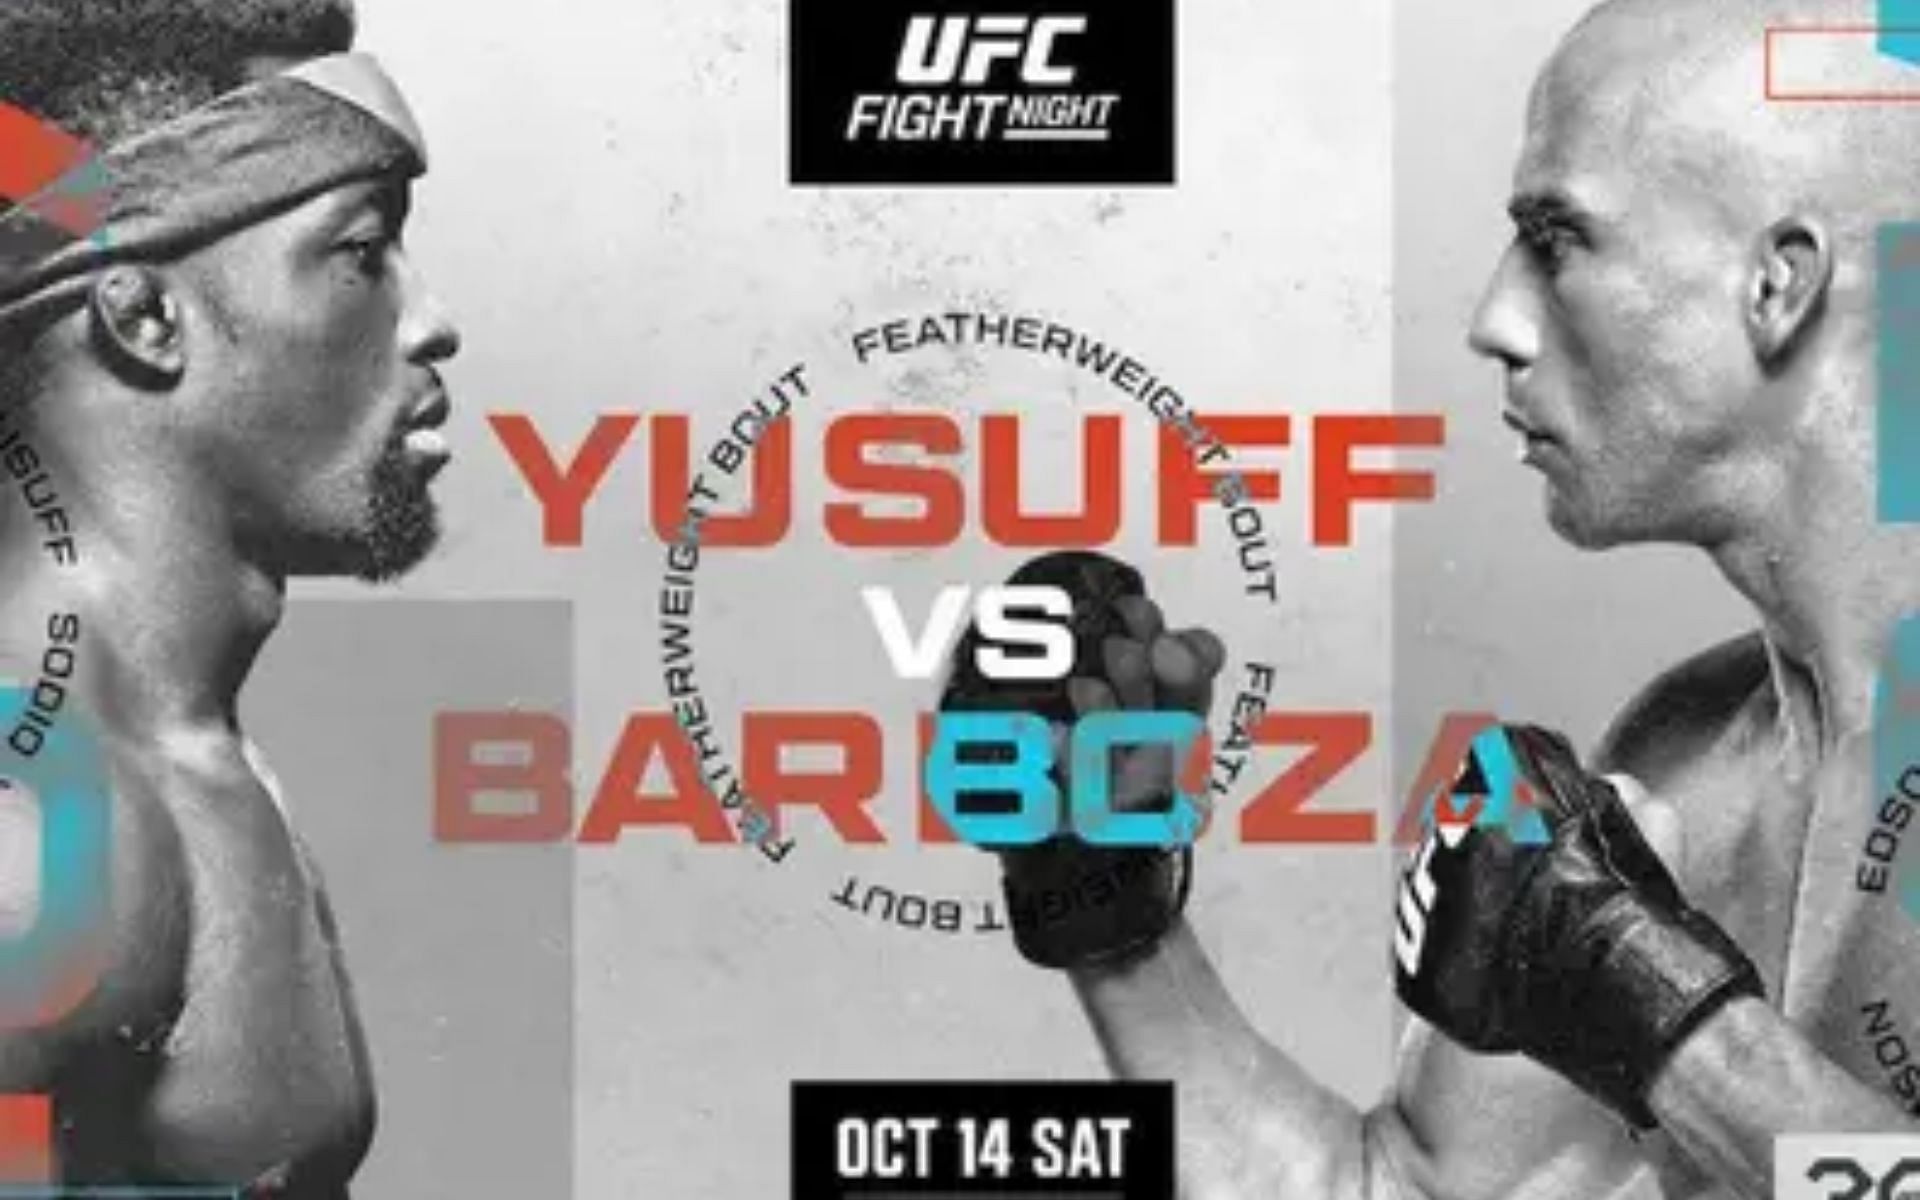 Sodiq Yusuff takes on Edson Barboza in this weekend